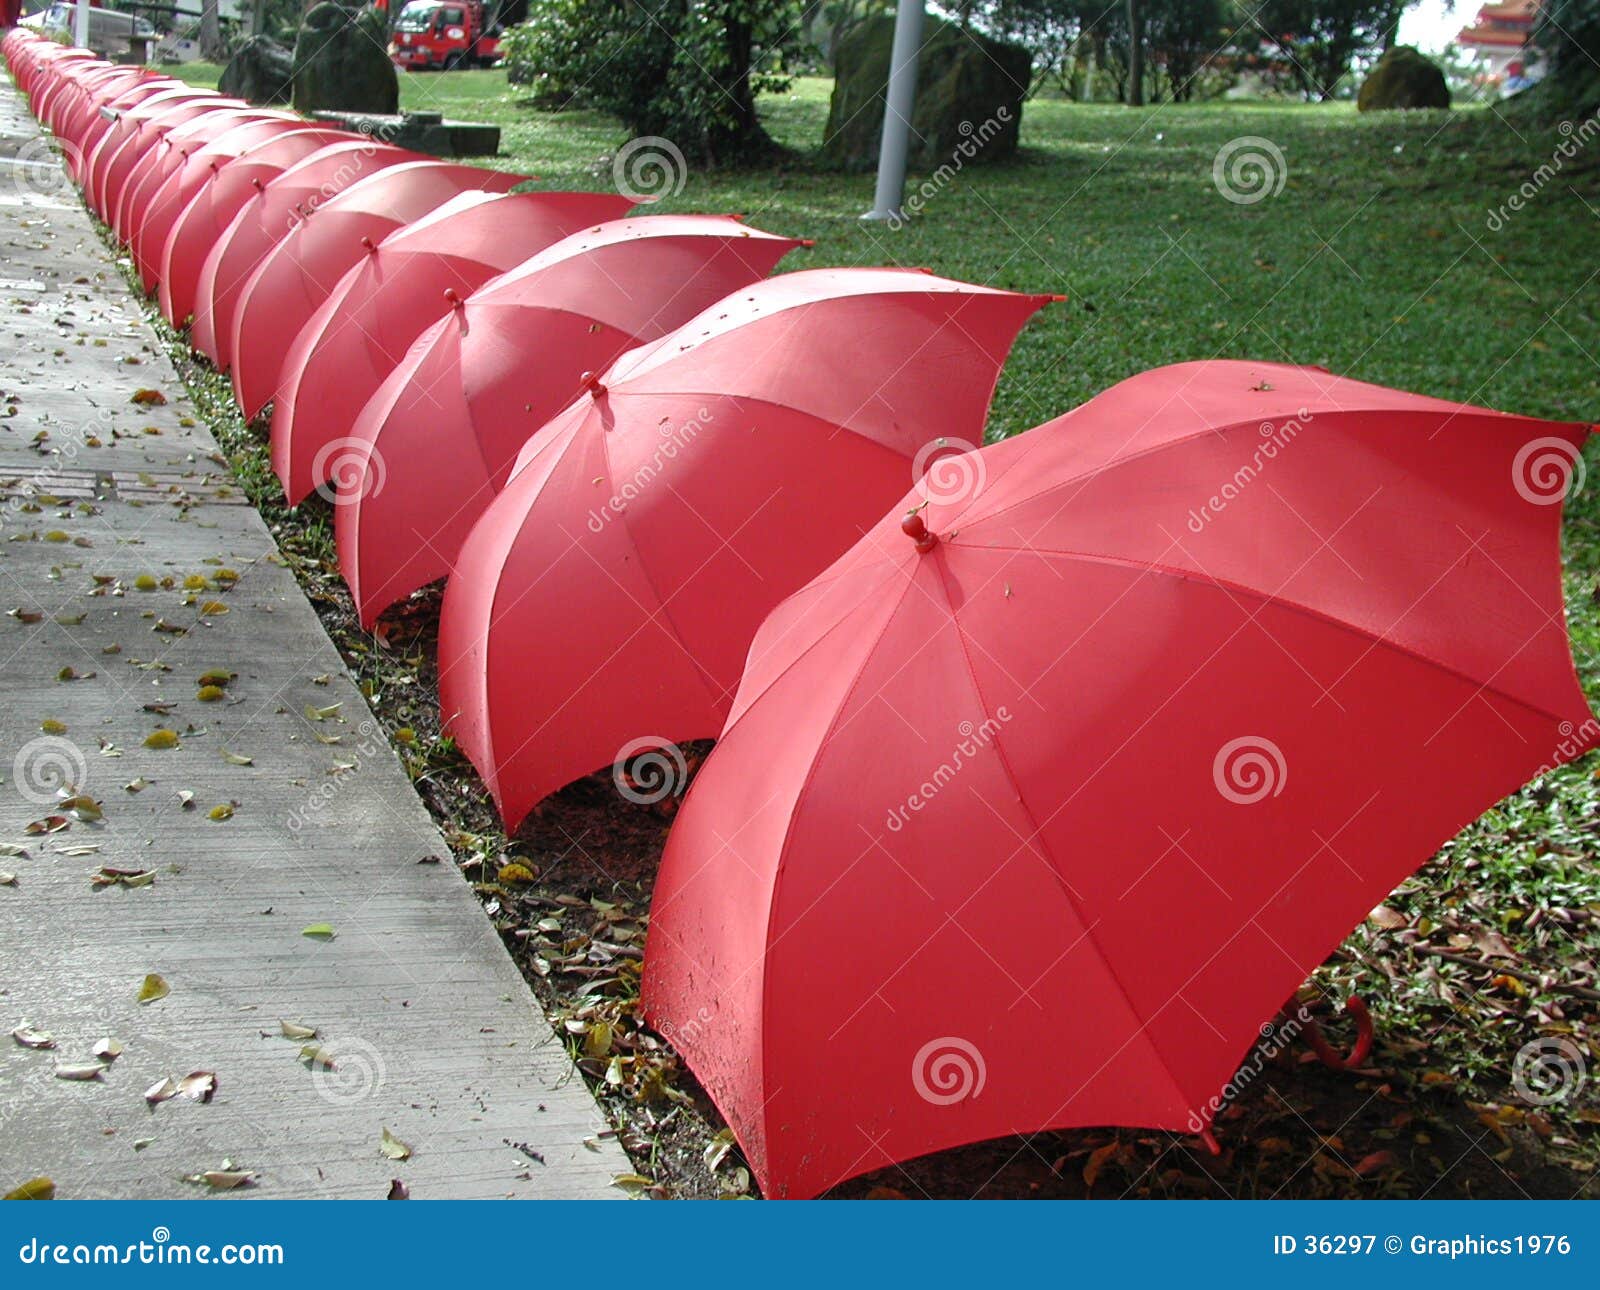 Umbrellas in a line stock image. Image of rain, path, many - 36297